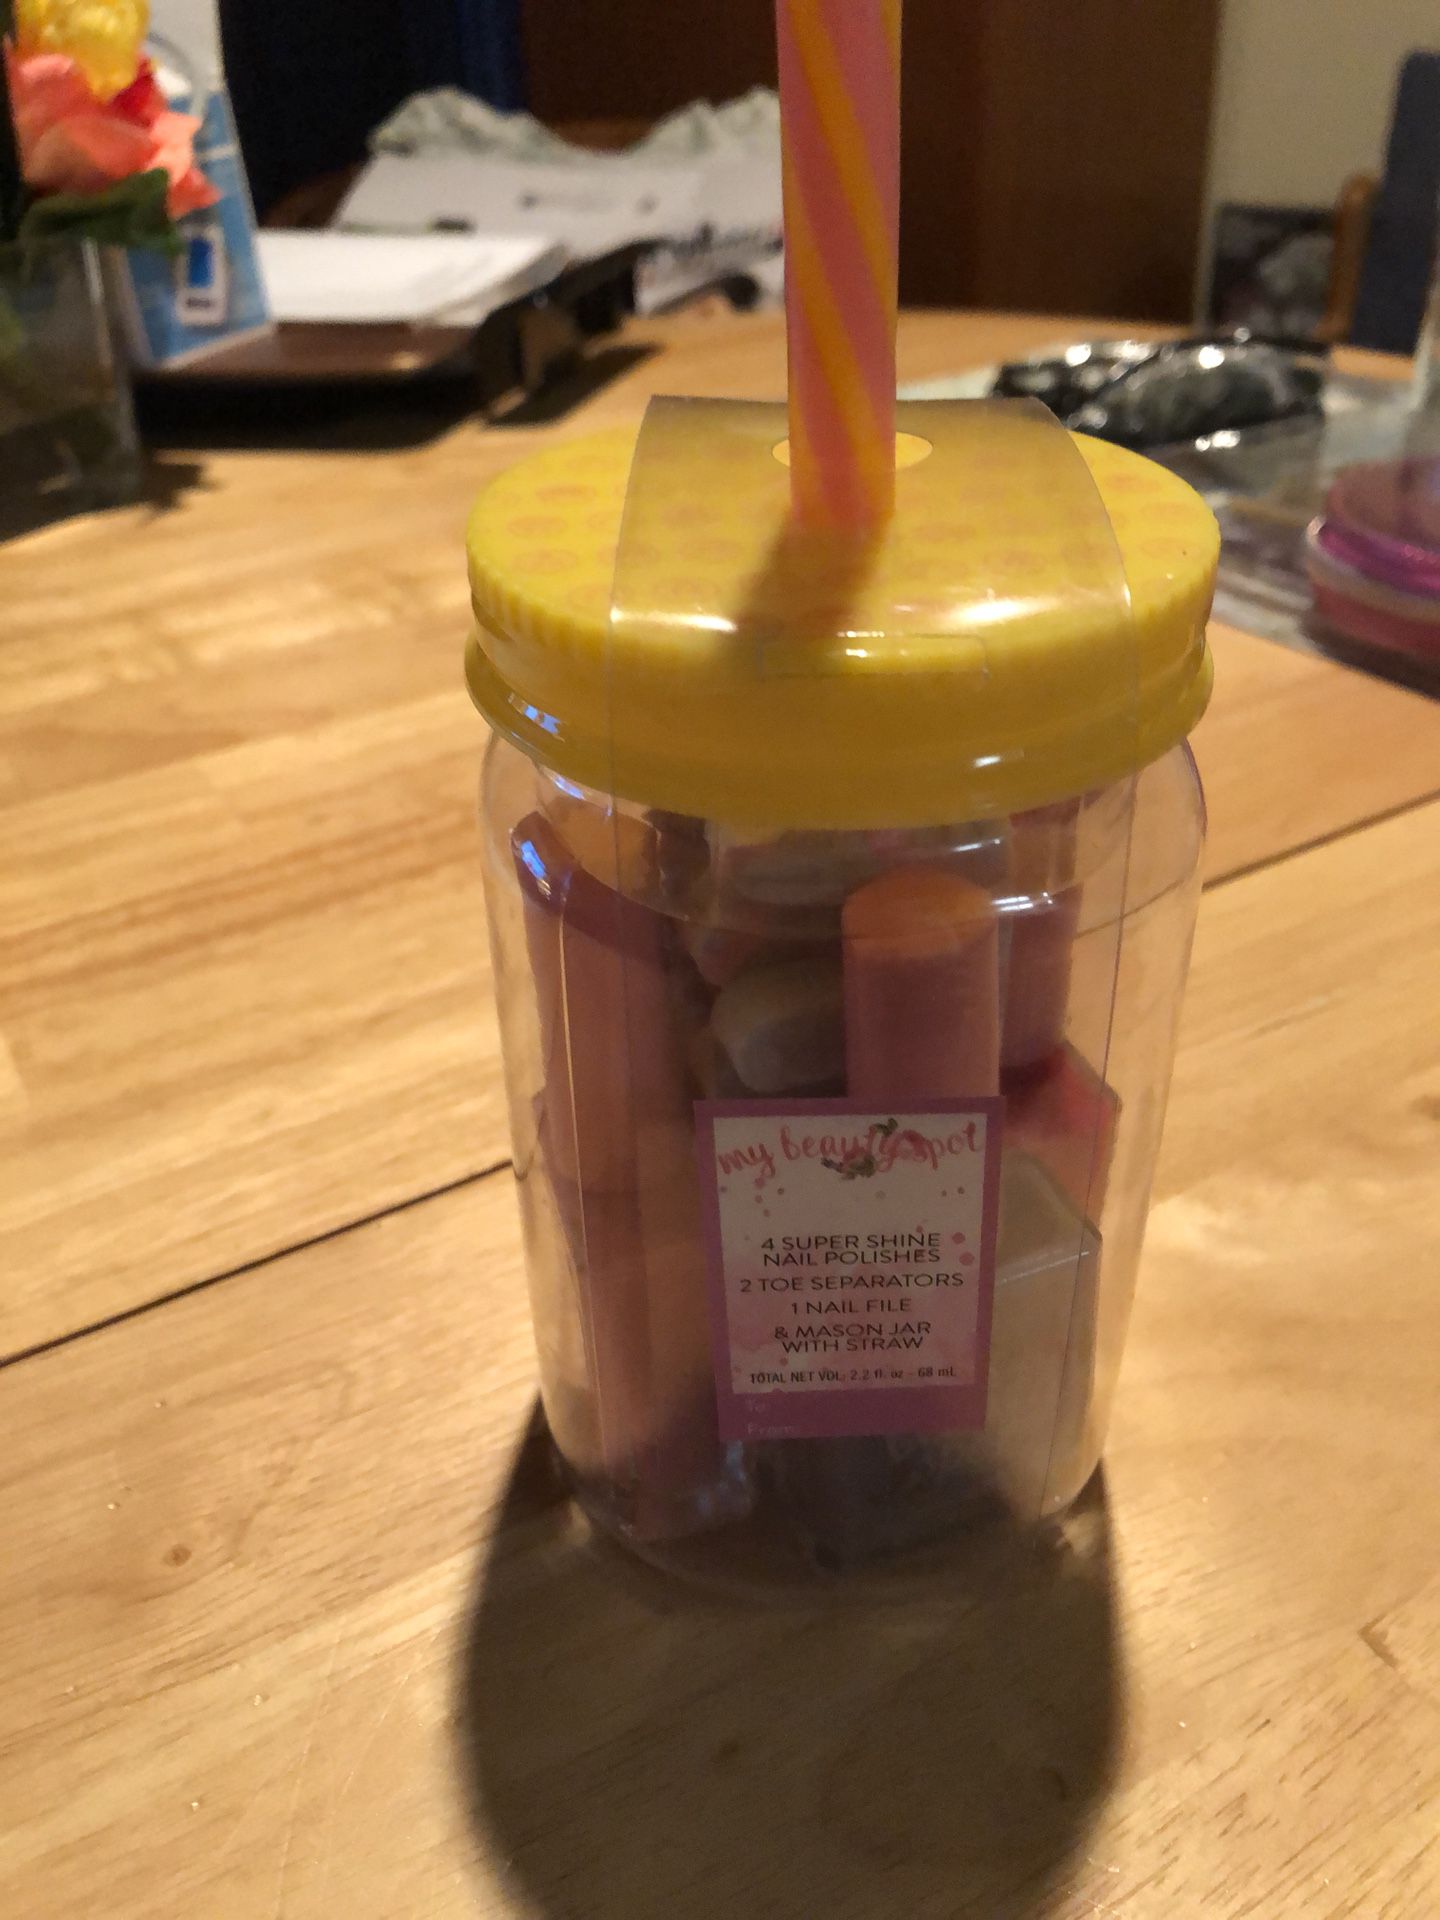 Nice gift for anyone multiple items inside mason jar with straw